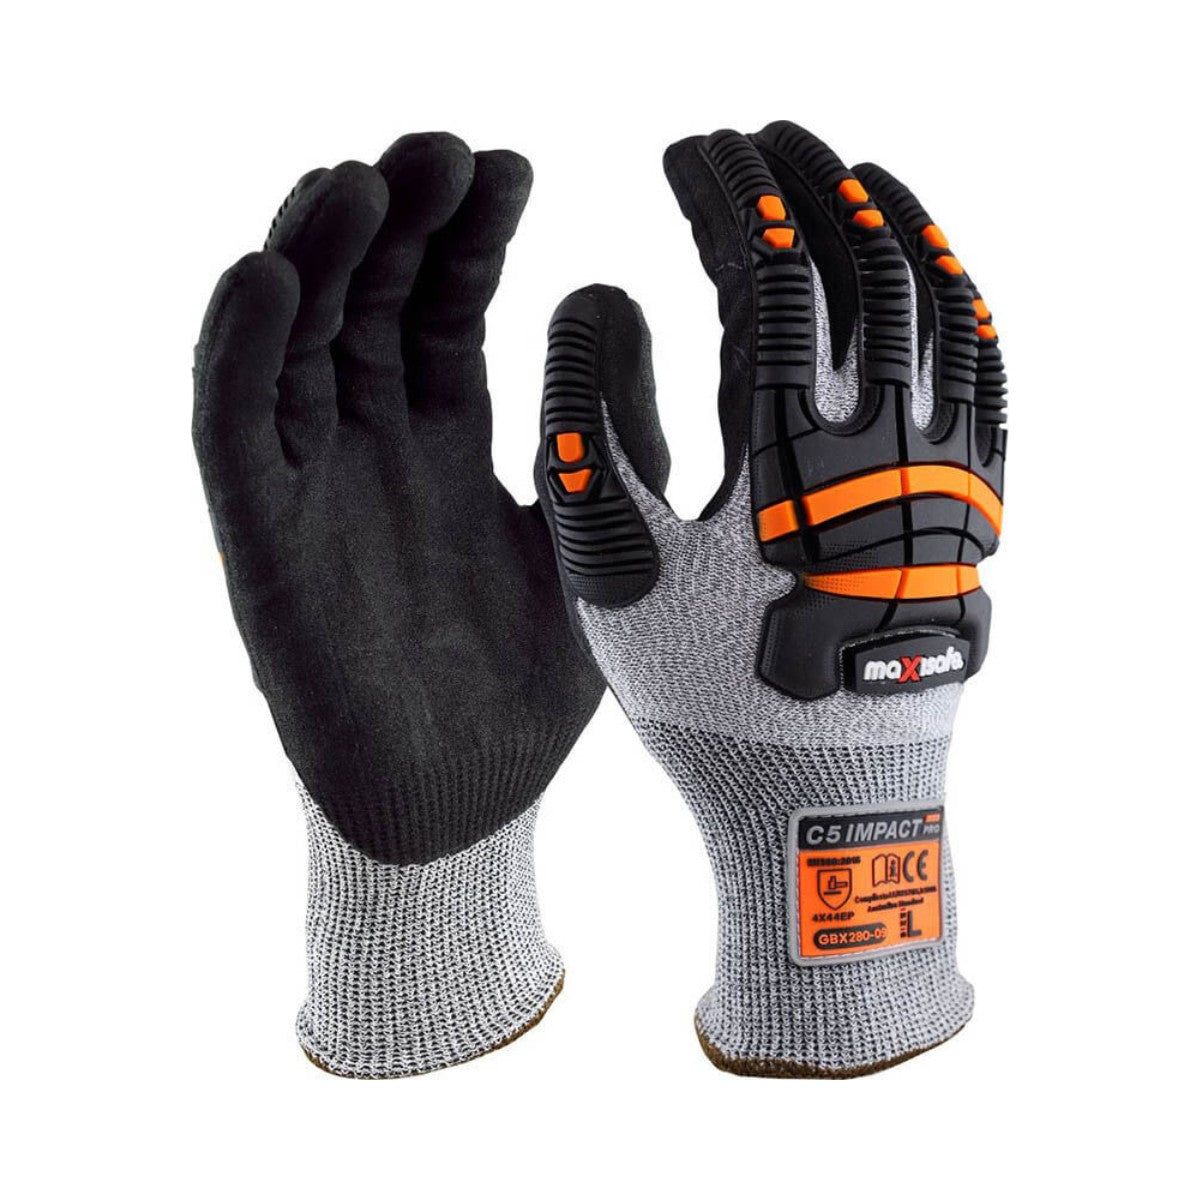 Maxisafe G-Force Cut 5 TPR Glove GBX280 (Pack of 12 Pairs)